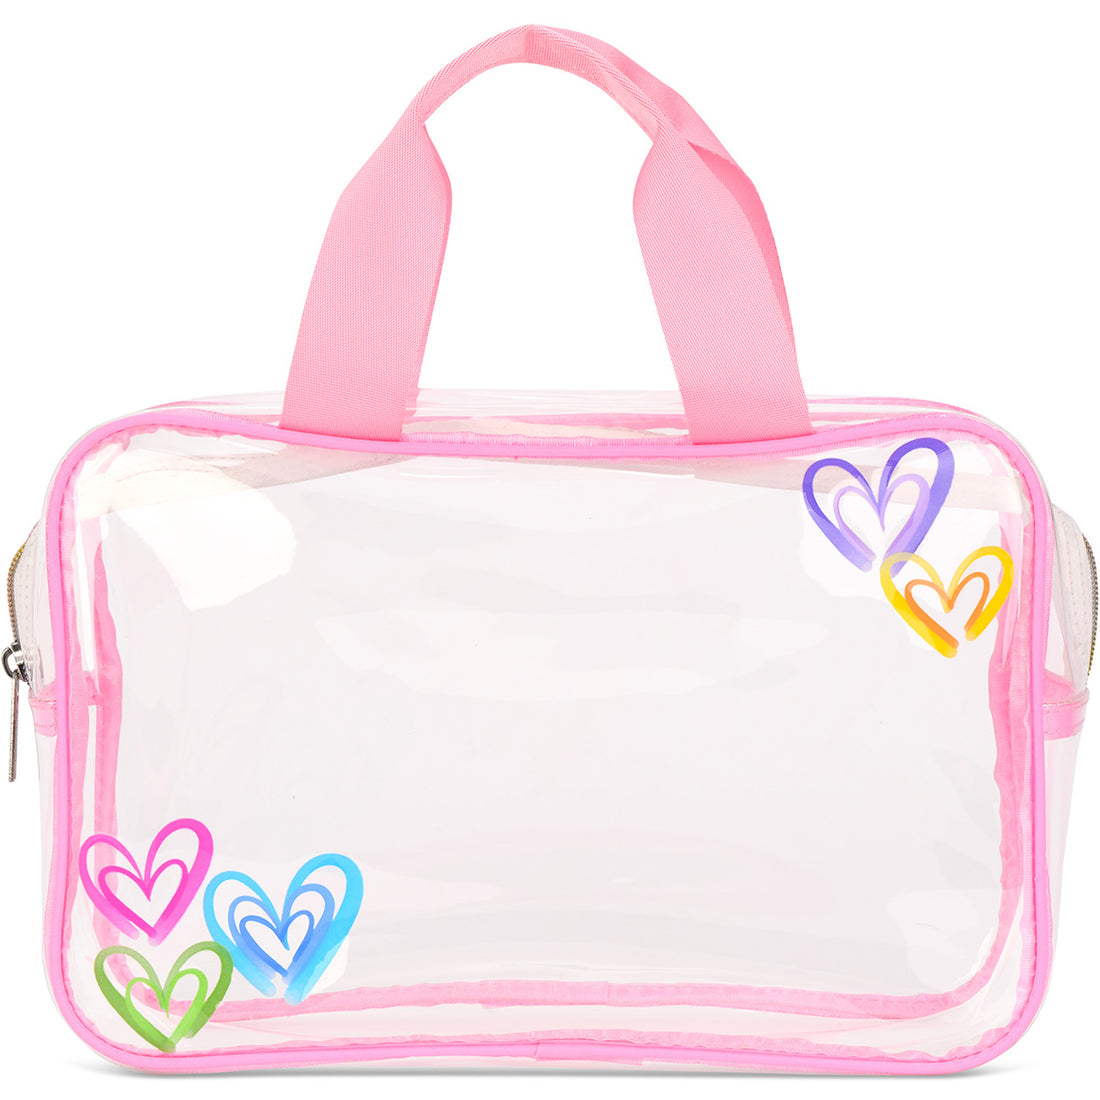 Corey Paige Hearts Cosmetic Bag Trio Preview #2